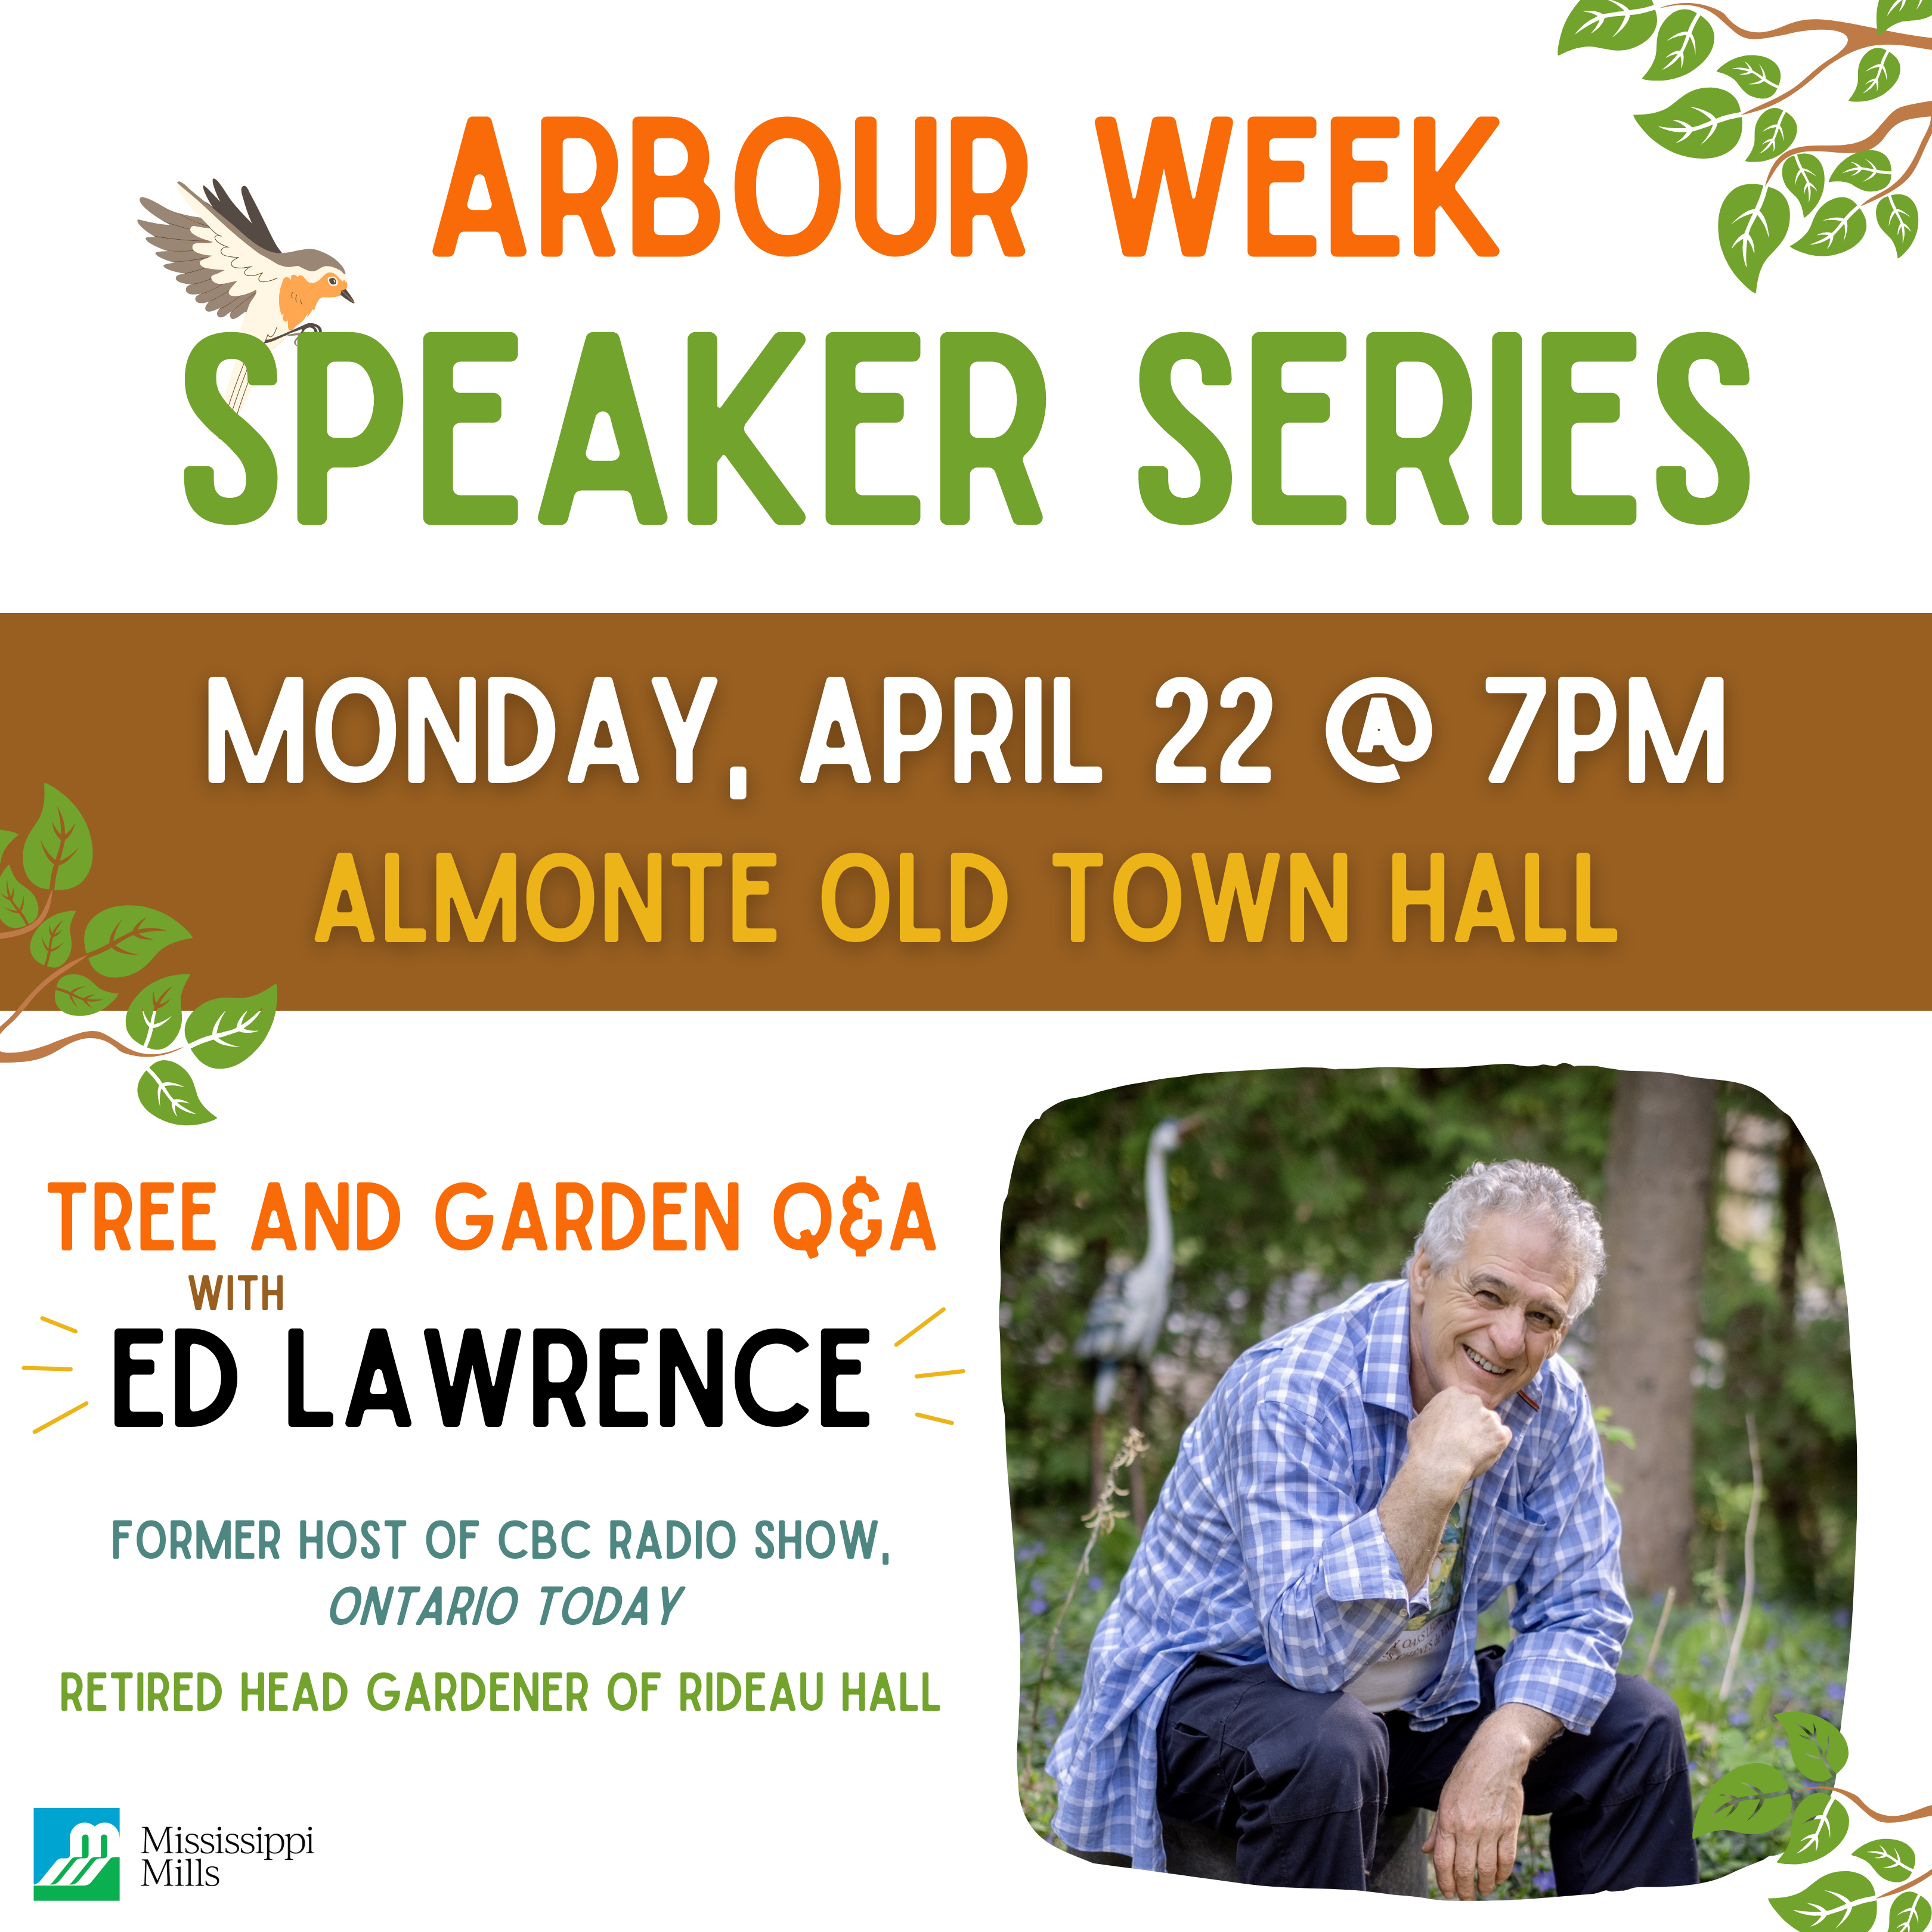 Graphic with photo of grey haired man and the text 'Arbour Week Speaker Series'